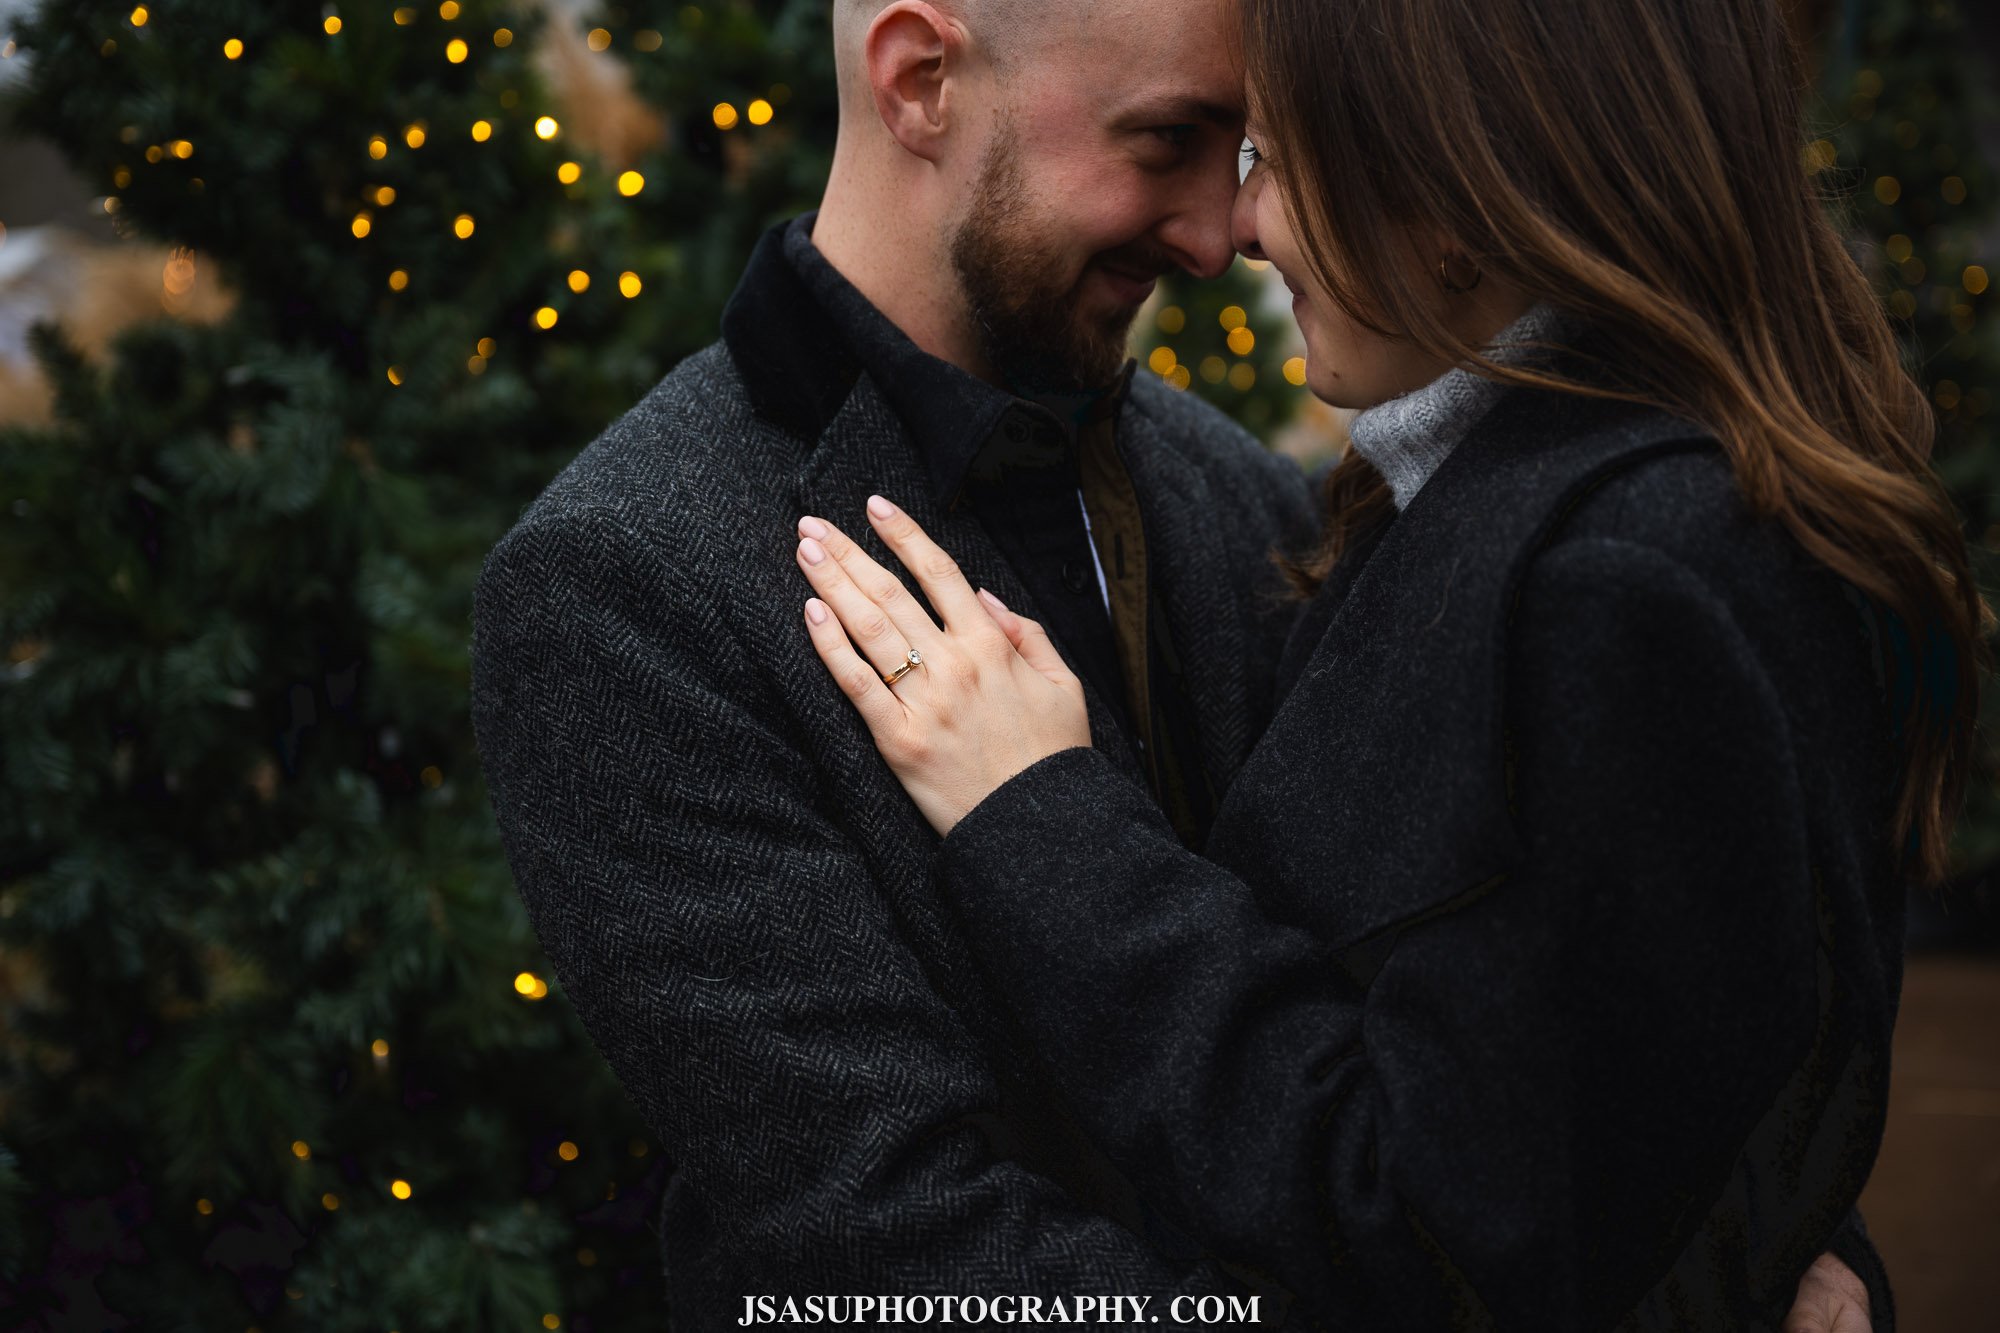 drew-alex-surprise-proposal-photos-old-westminister-winery-jsasuphotography-13.jpg